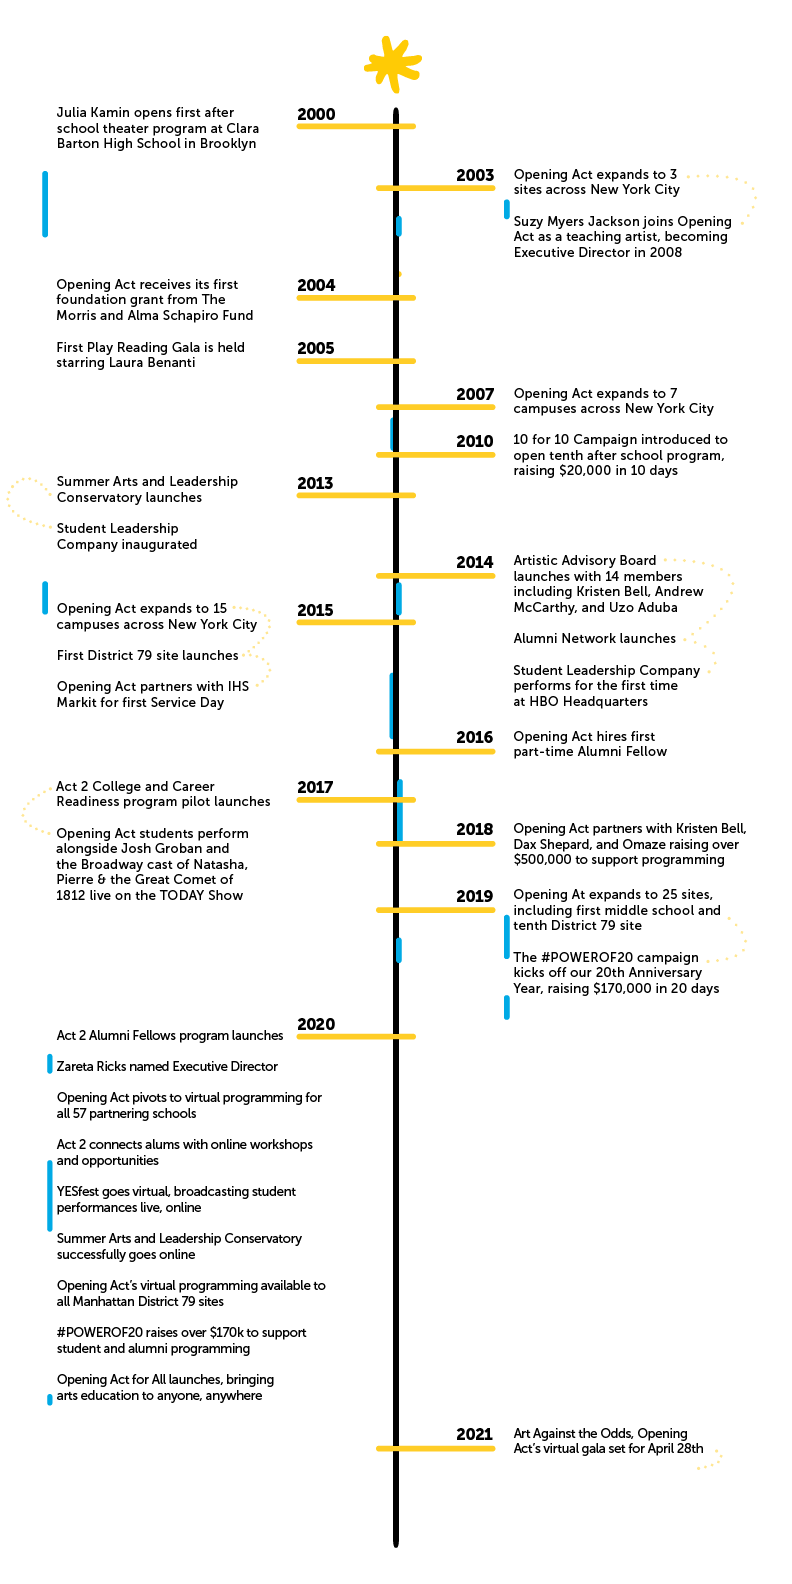 vertical timeline showing important moments in 20 year history